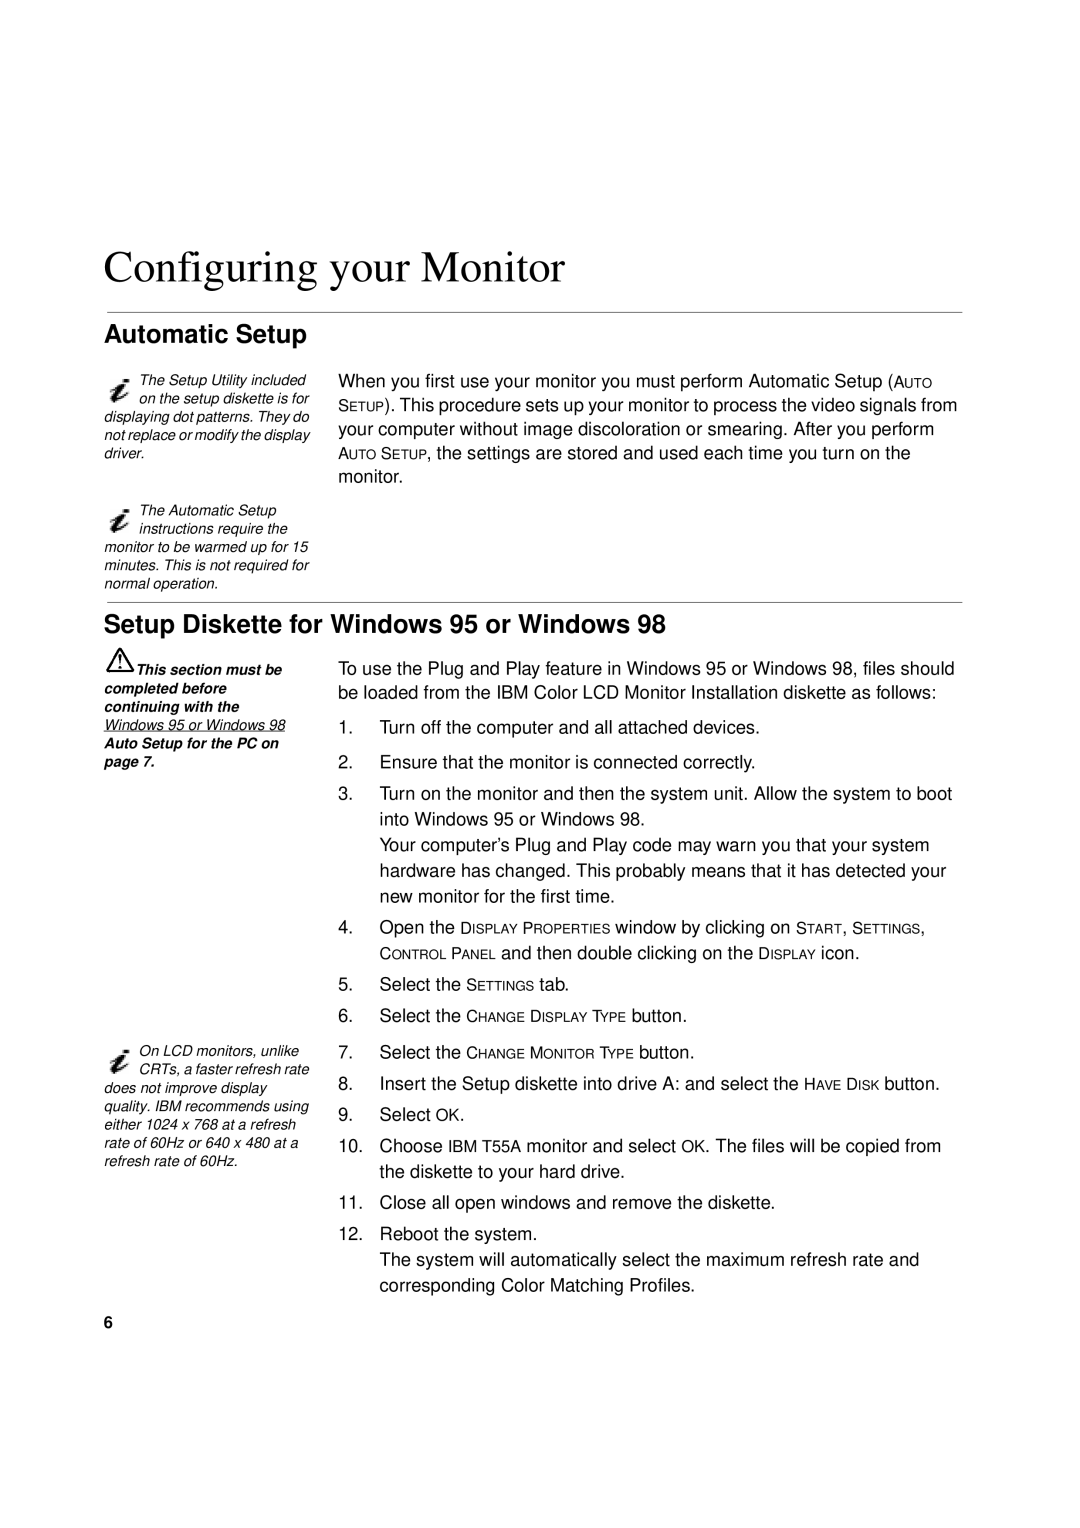 IBM T 55A manual Configuring your Monitor, Automatic Setup, Setup Diskette for Windows 95 or Windows 